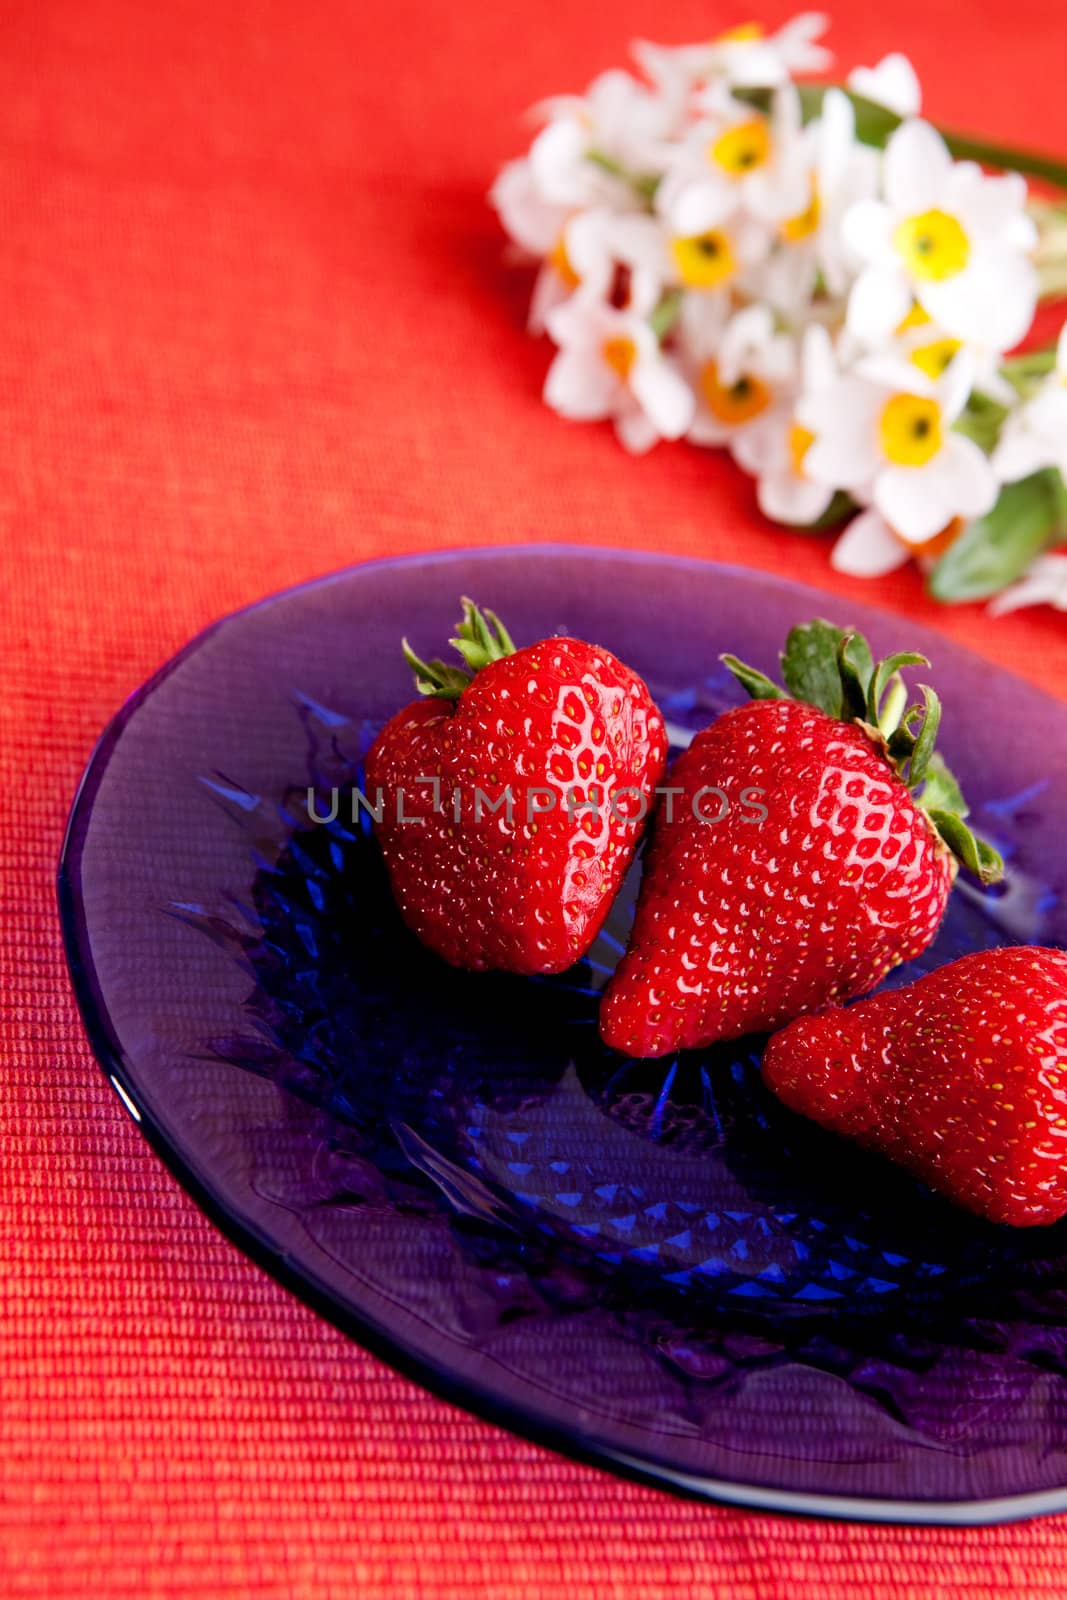 A plate with strawberries in a natural setting